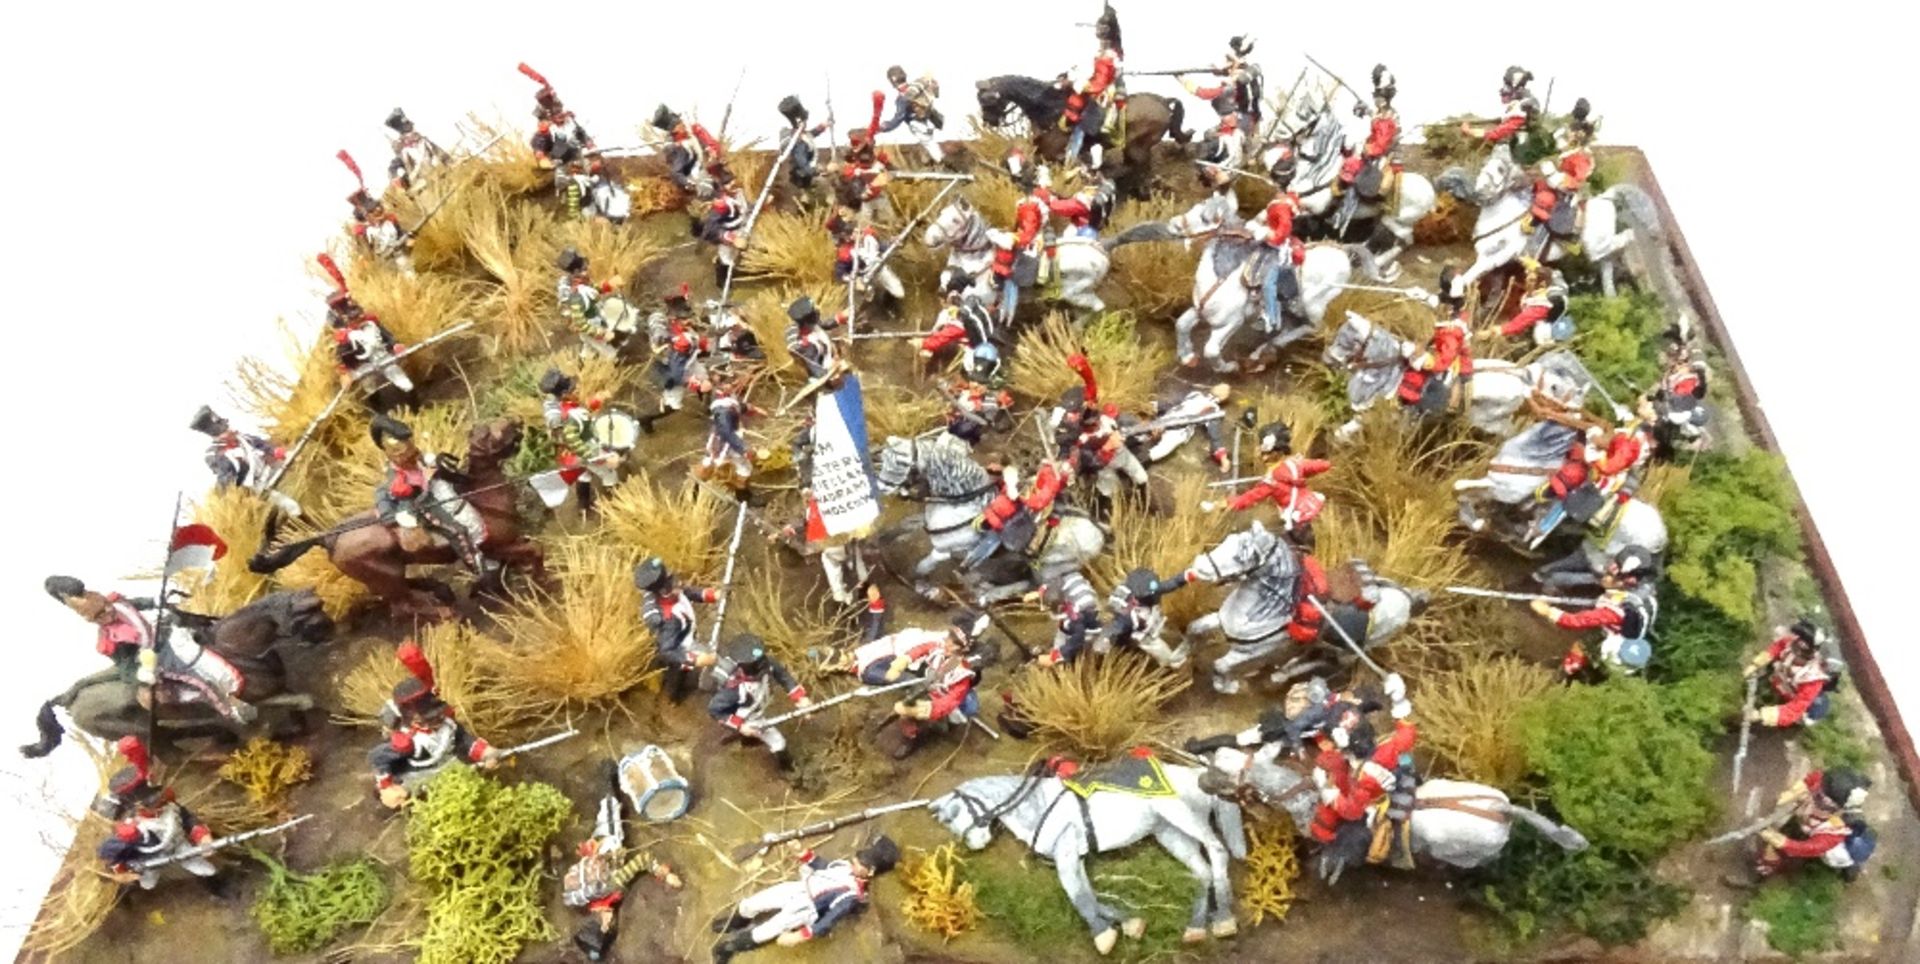 Charge of the Union Brigade and Gordon Highlanders at Waterloo 1815 - Image 3 of 4